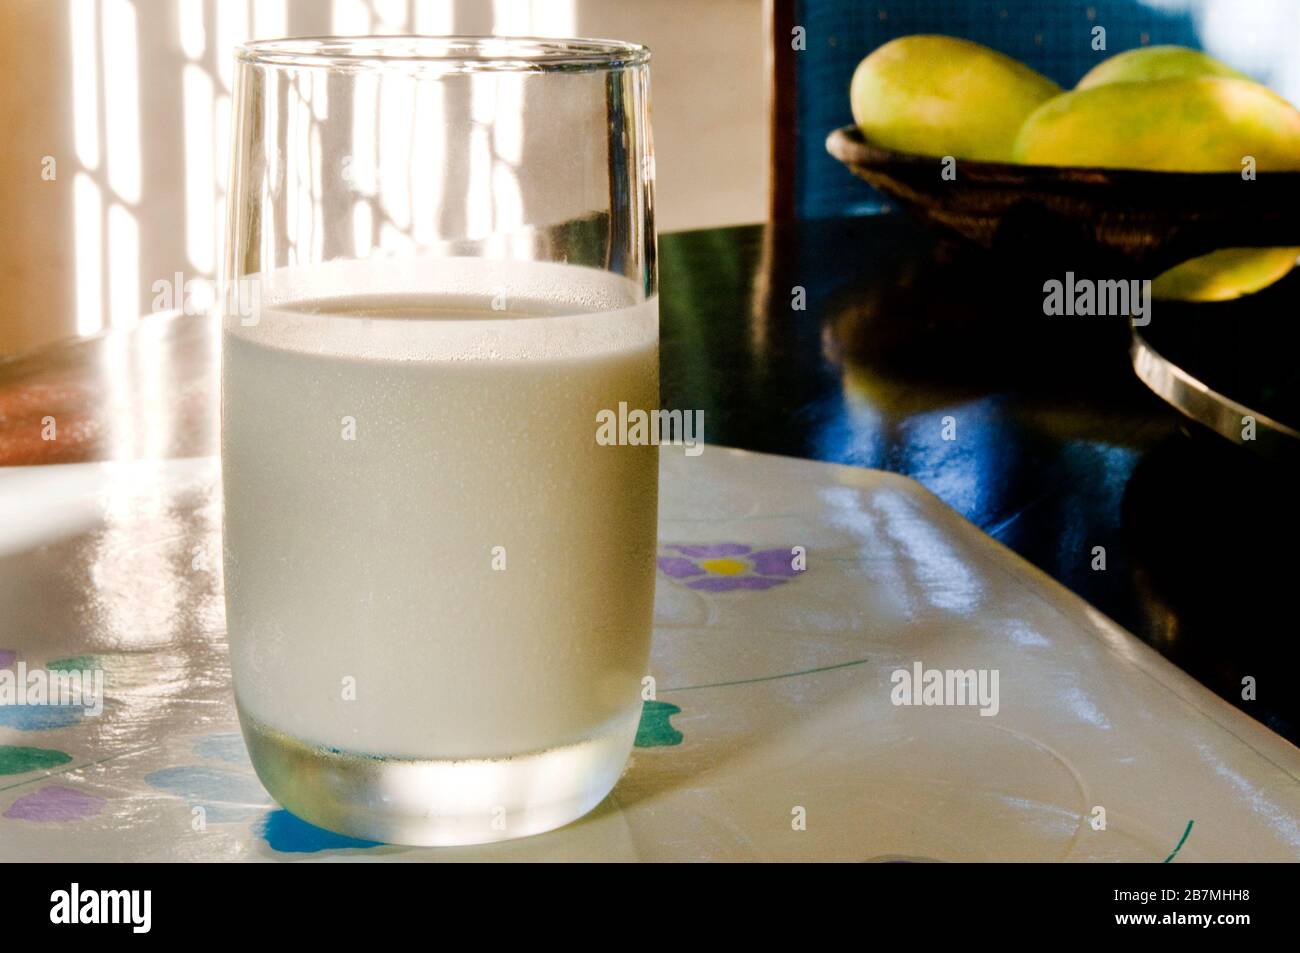 Milk is a nutritious white liquid food from mammals. It is the primary source of nutrition for babies. Stock Photo